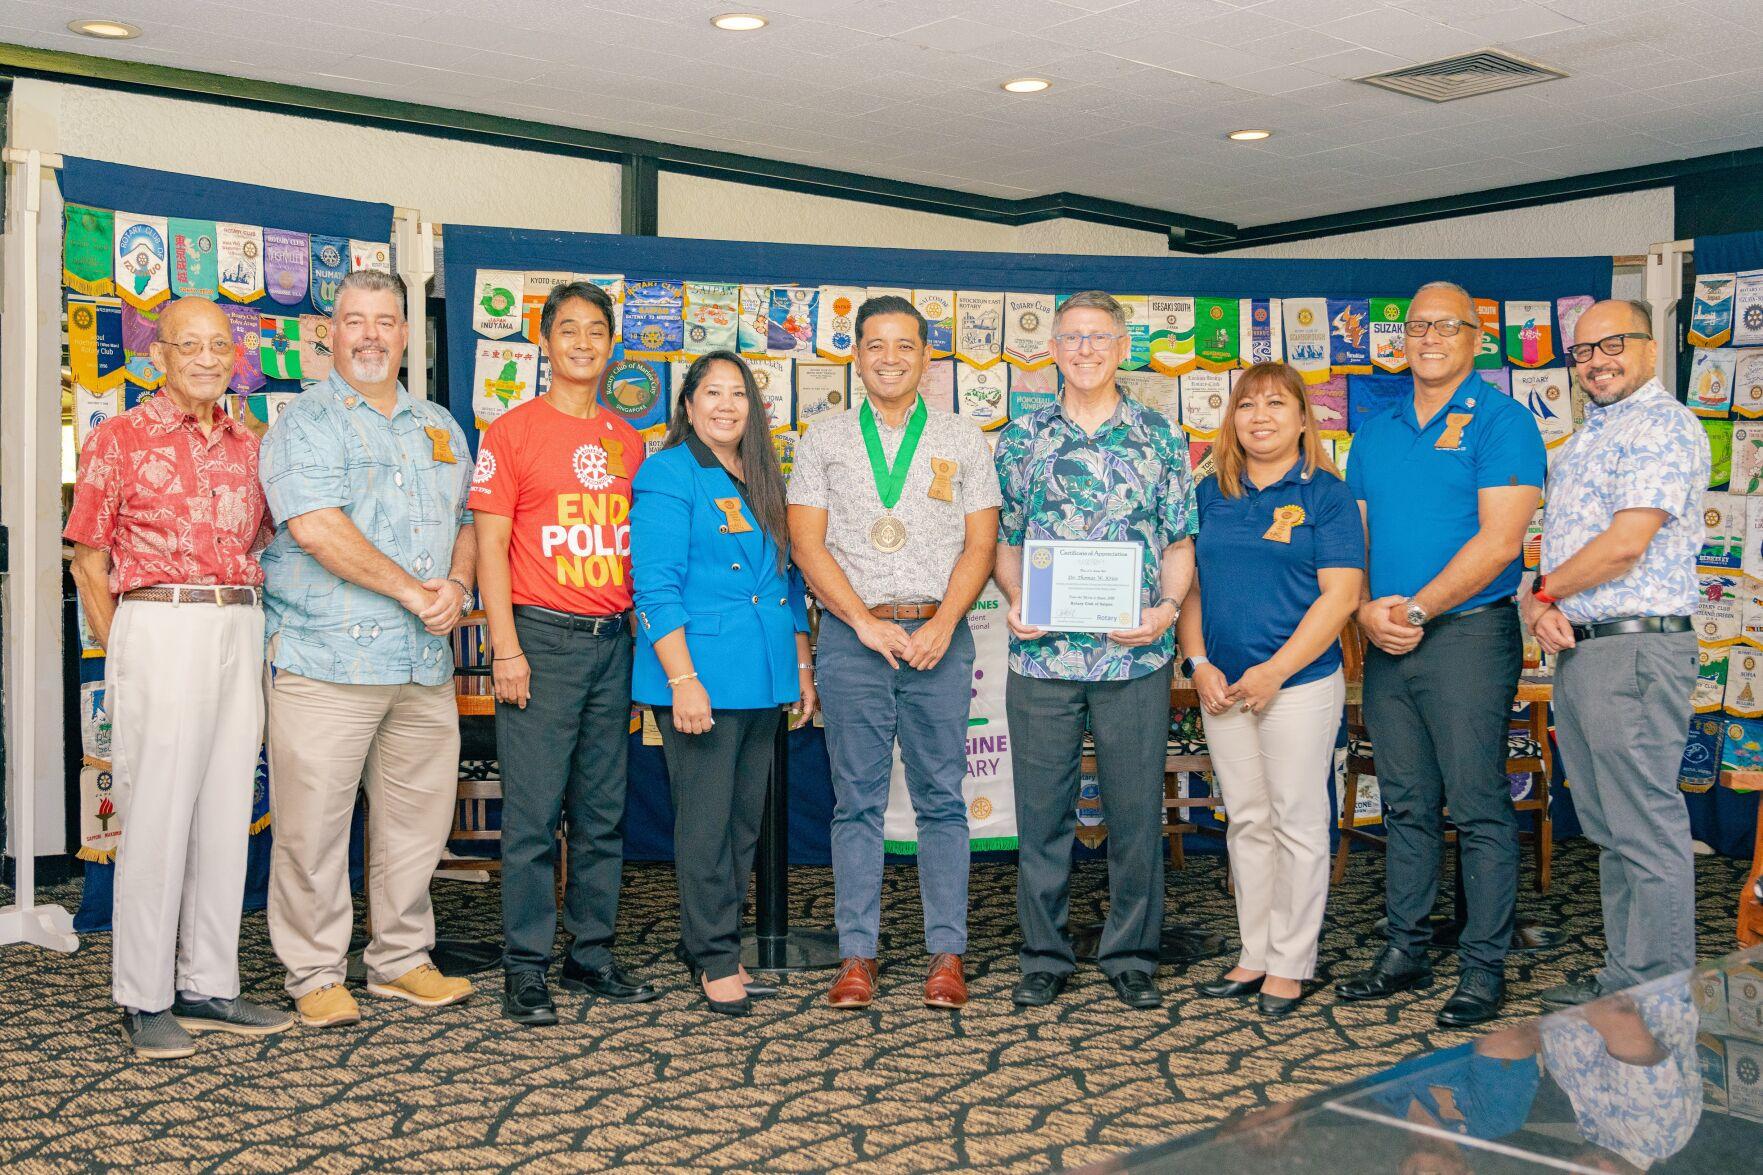 Frankie Eliptico, Northern Marianas College Vice President for Administration and Advancement (center), was awarded the University of Guam’s “Milåyan Presidenten” or The President’s Medal by UOG President Dr. Thomas W. Krise at the Saipan Rotary Club’s meeting on Tuesday, August 10, 2022. In photo with Eliptico from left are Rotarians Dave Sablan and Mario Valentino, Rotary Club President Wendell Posadas, Rotarian Joann Aquino, UOG President Dr. Thomas W. Krise, Rotarian Jessy Loomis, NMC Board of Regents Chairperson and Rotarian Charles V. Cepeda, and NMC President Galvin Deleon Guerrero, EdD.